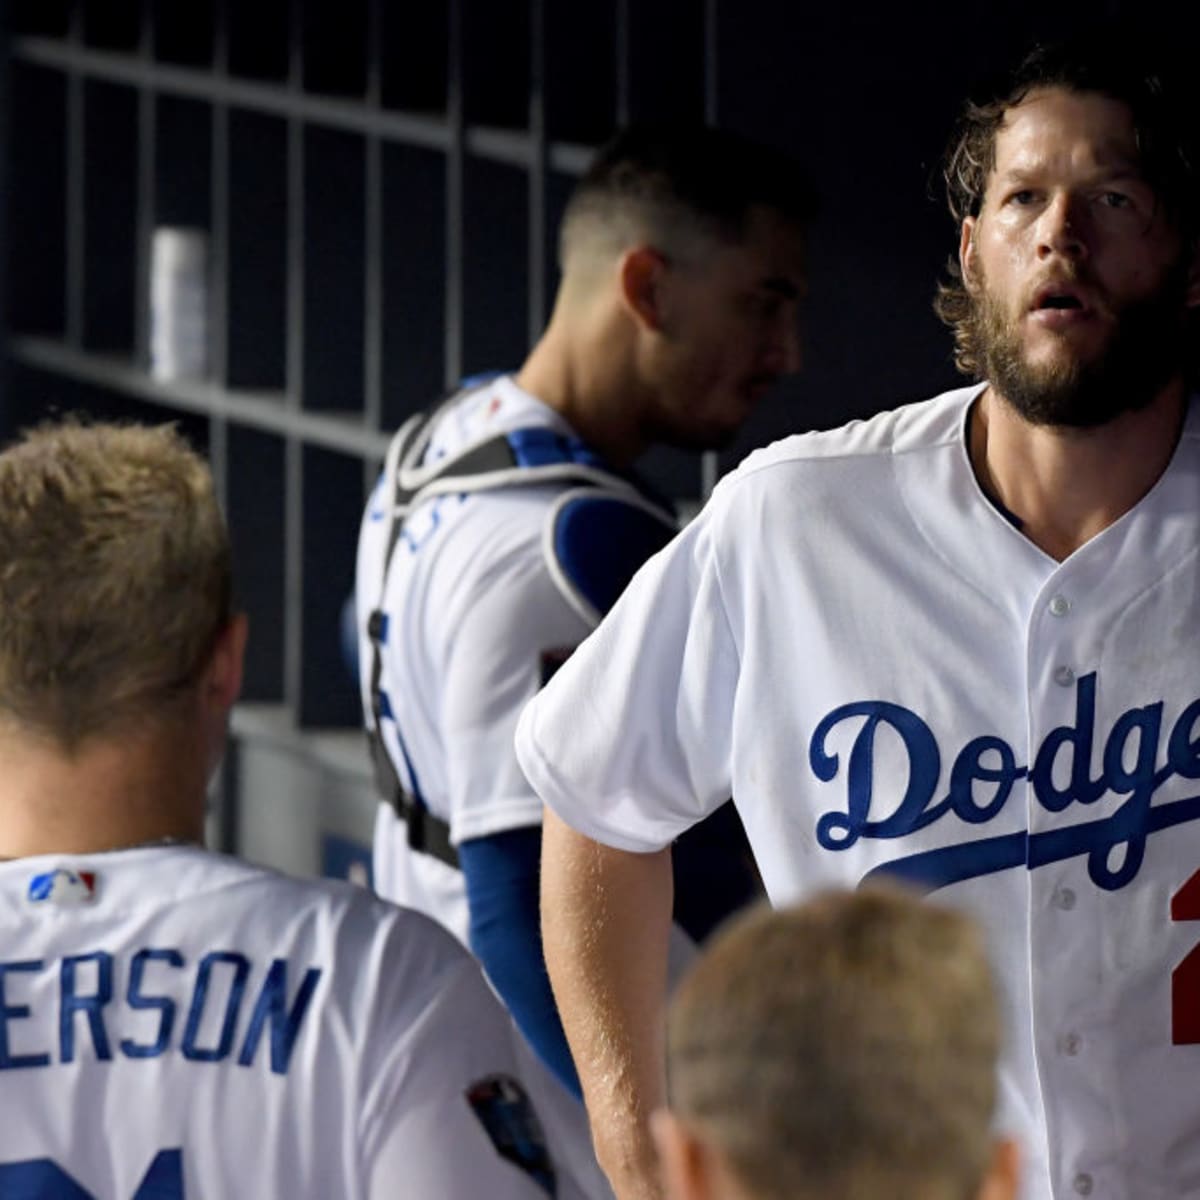 The Dodgers World Series Loss Is Giving People a Lot of Feelings